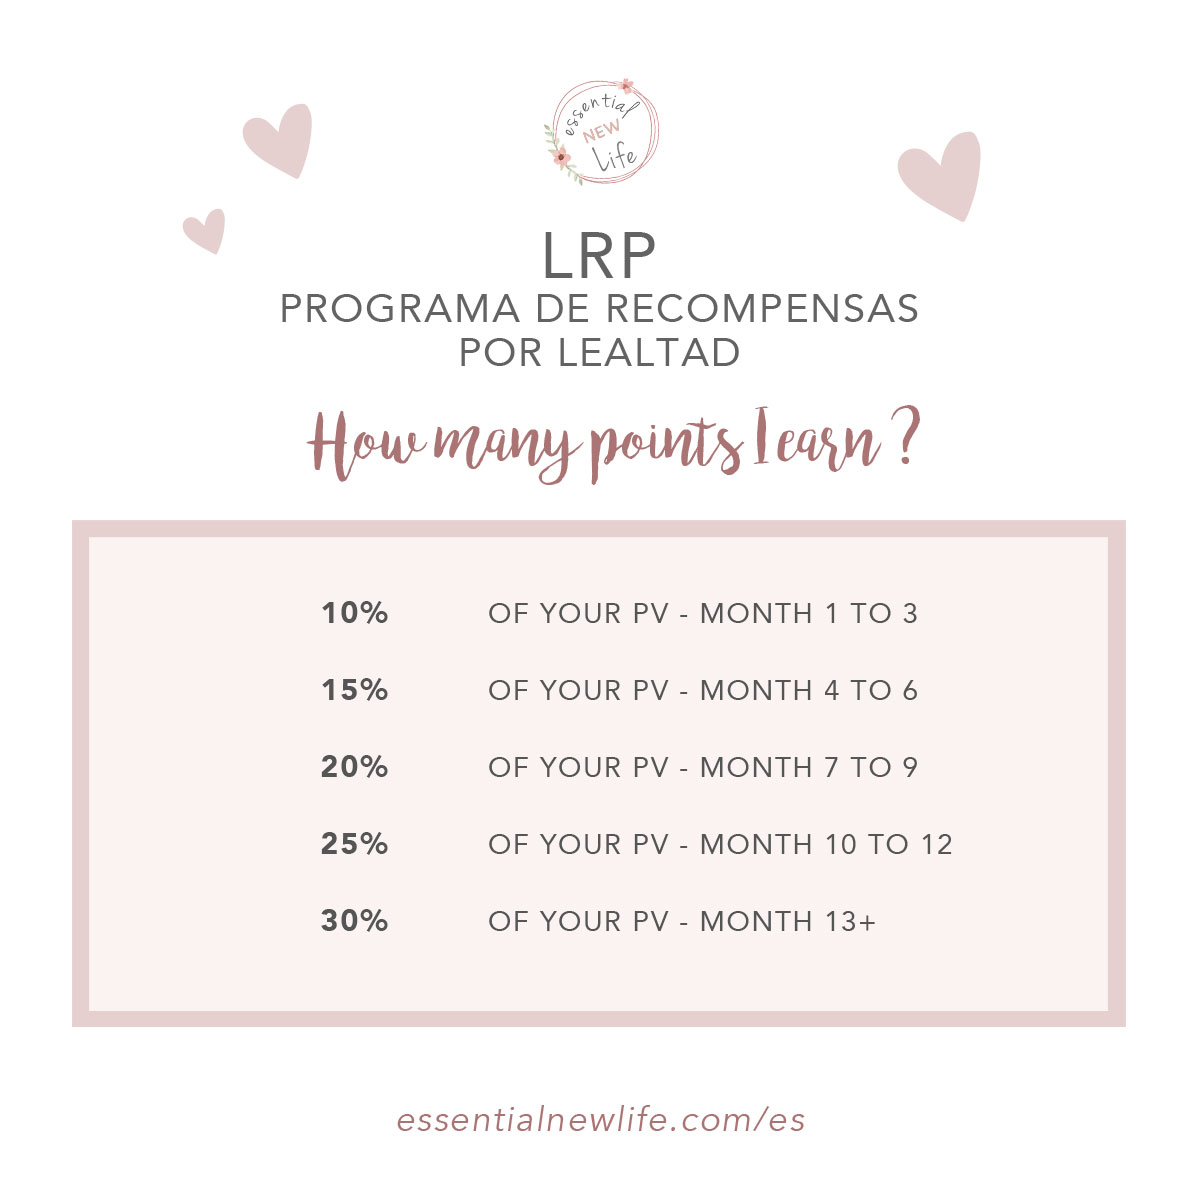 Essential New Life | Loyalty Rewards Program (LRP) - How many points I earn?